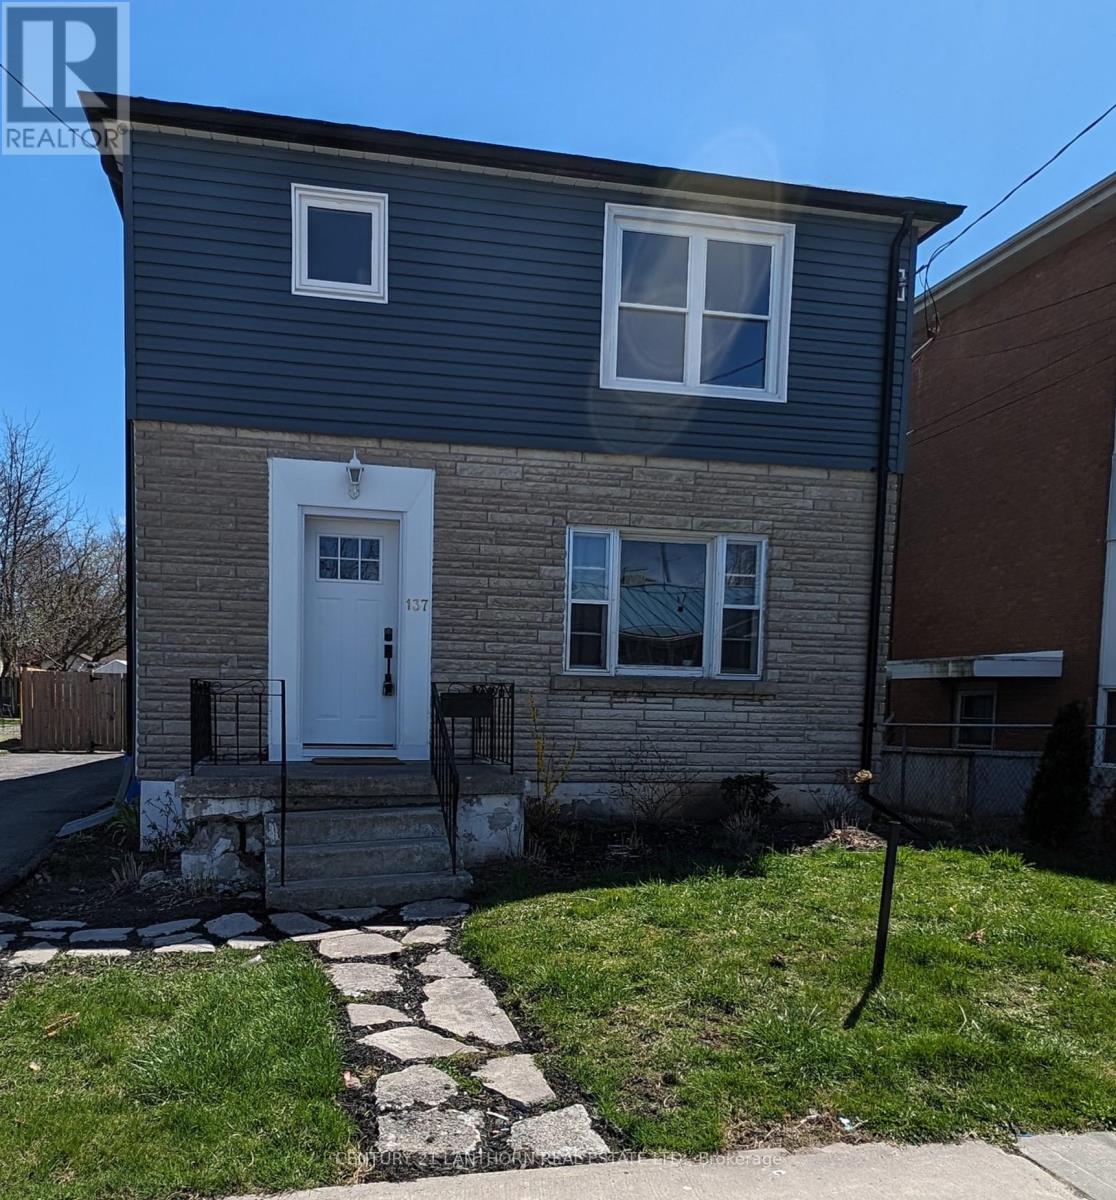 137 Catharine Street, Belleville, 4 Bedrooms Bedrooms, ,2 BathroomsBathrooms,Single Family,For Sale,Catharine,X8248660